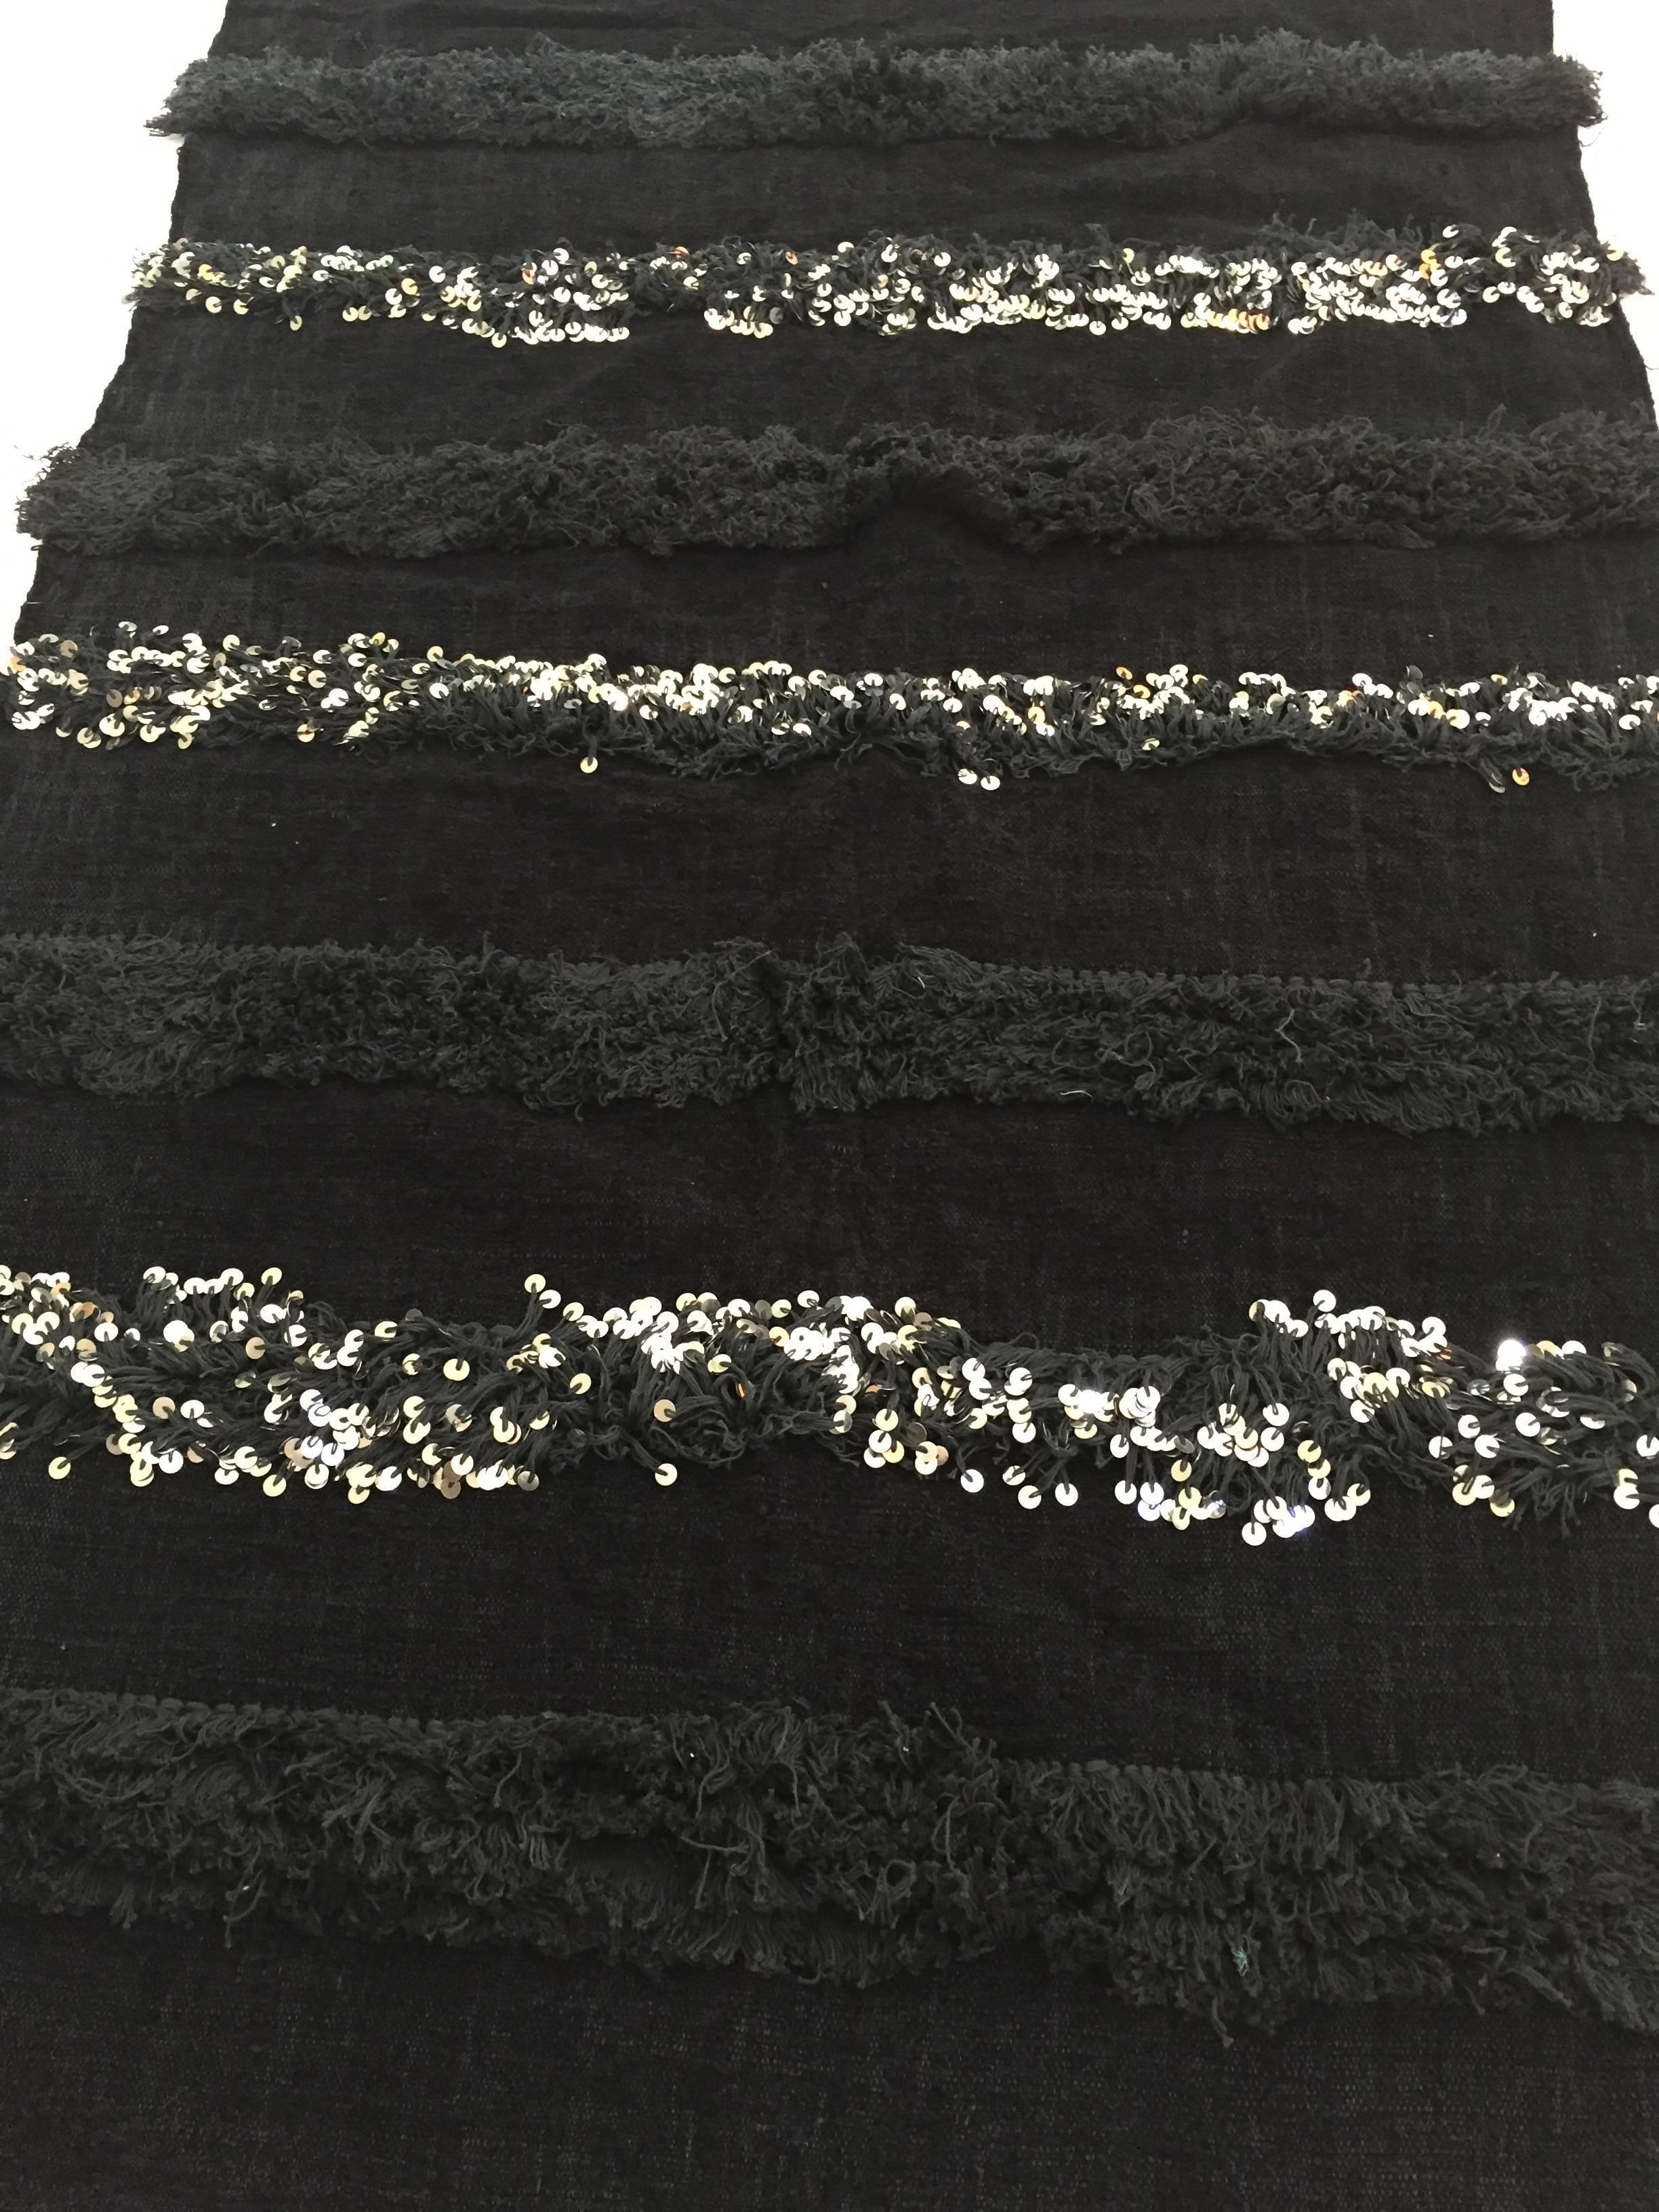 Vintage Black Moroccan Throw Blanket Tribal Textile with Silver Sequins 2